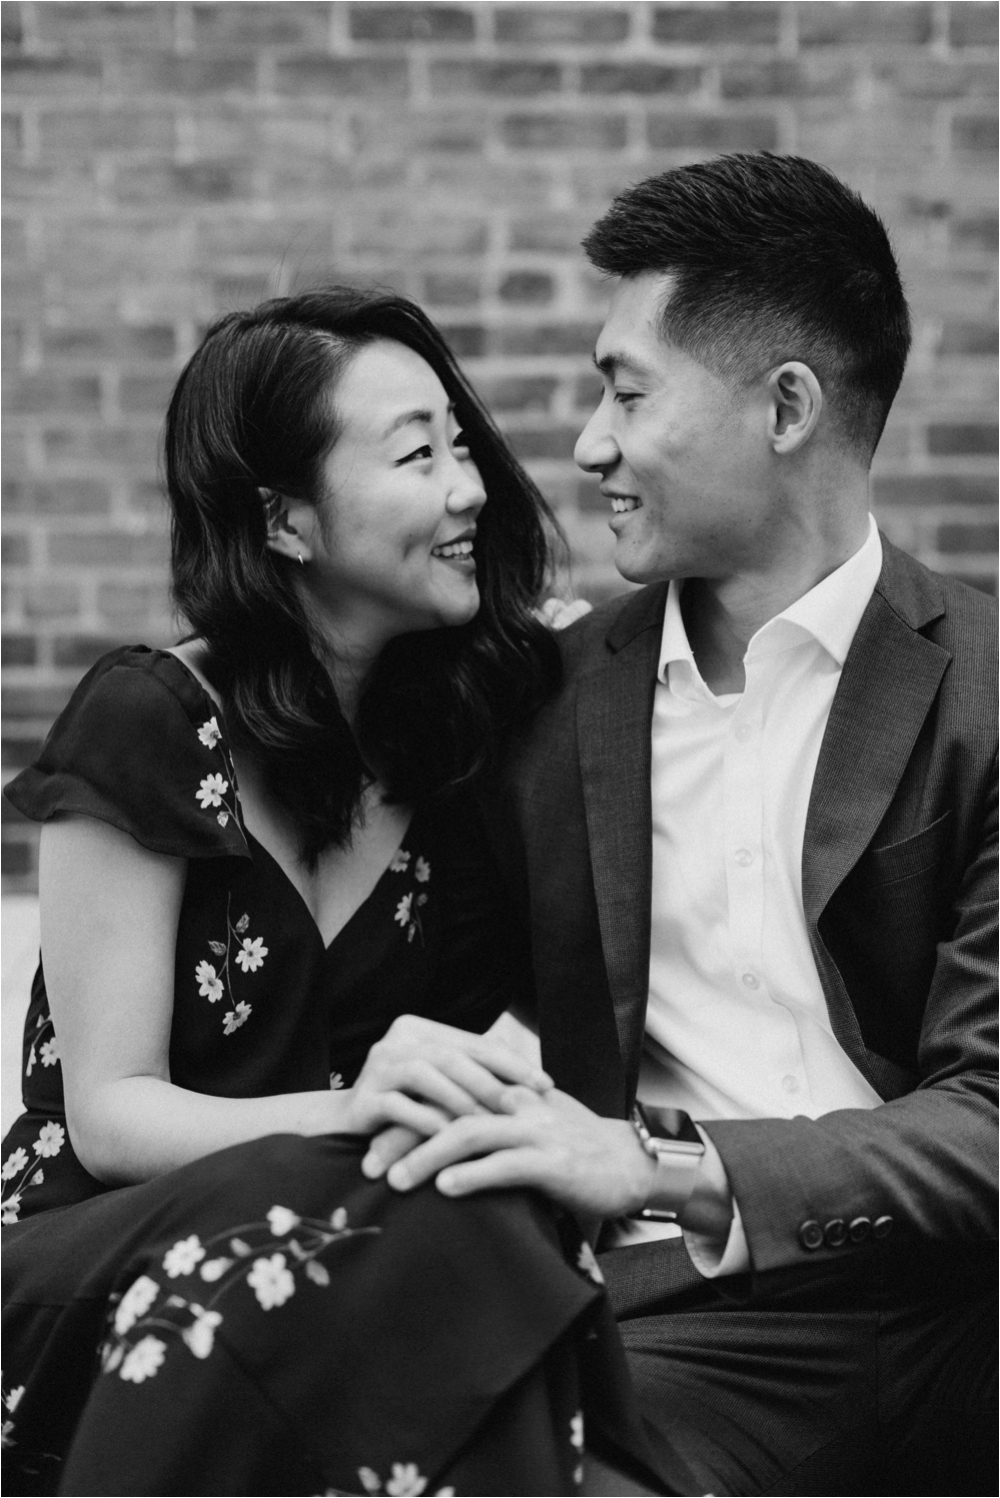 Engagement Session at the Washington mews in new york city